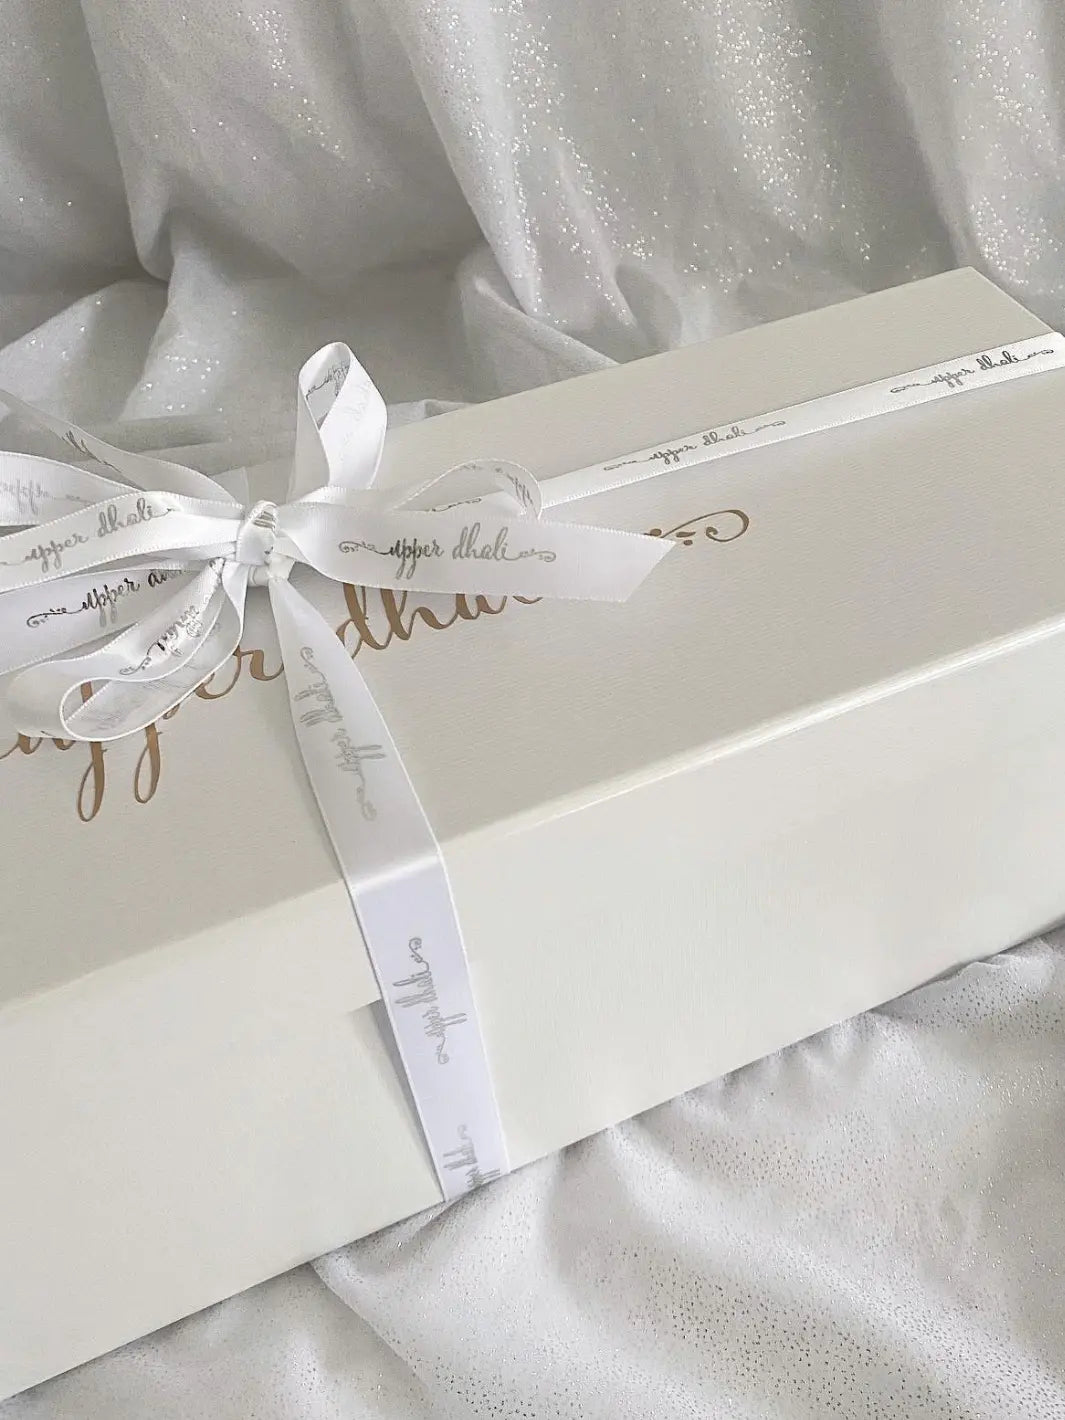 close up image of white gifting box with gold logo & white satin ribbon for Upper Dhali handmade dolls